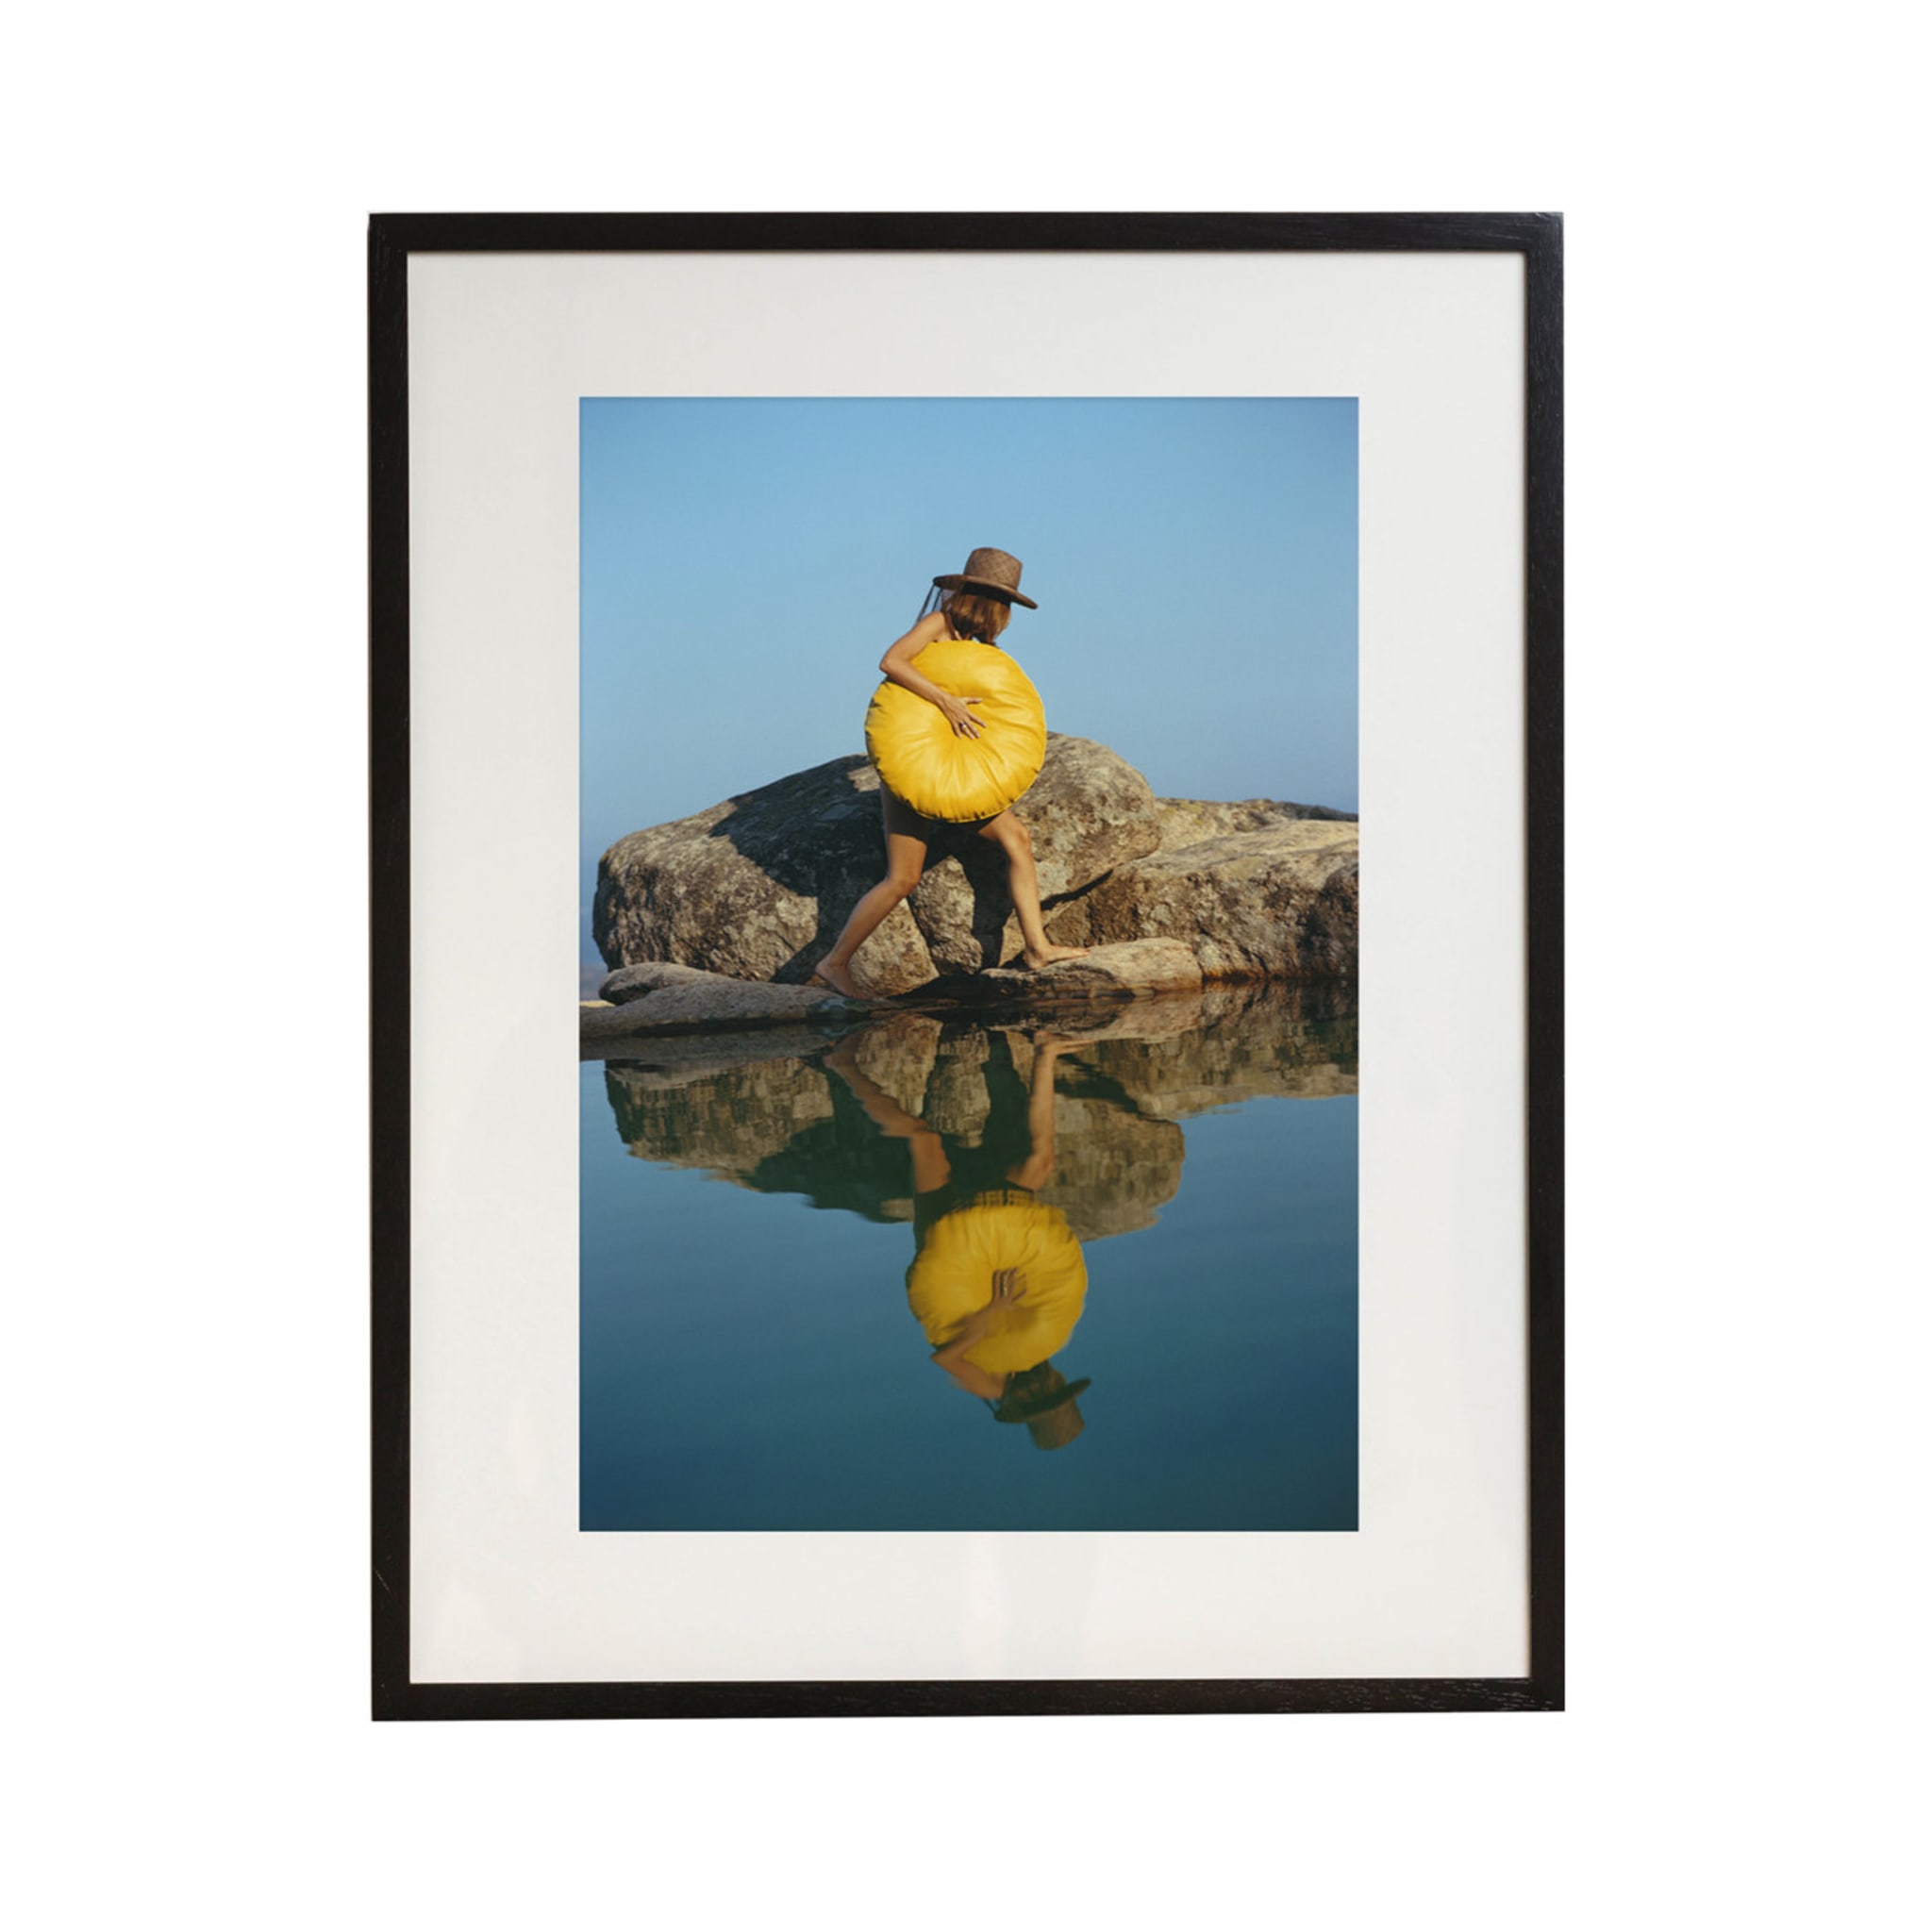 Finding A Spot Framed Print by Slim Aarons - Main view